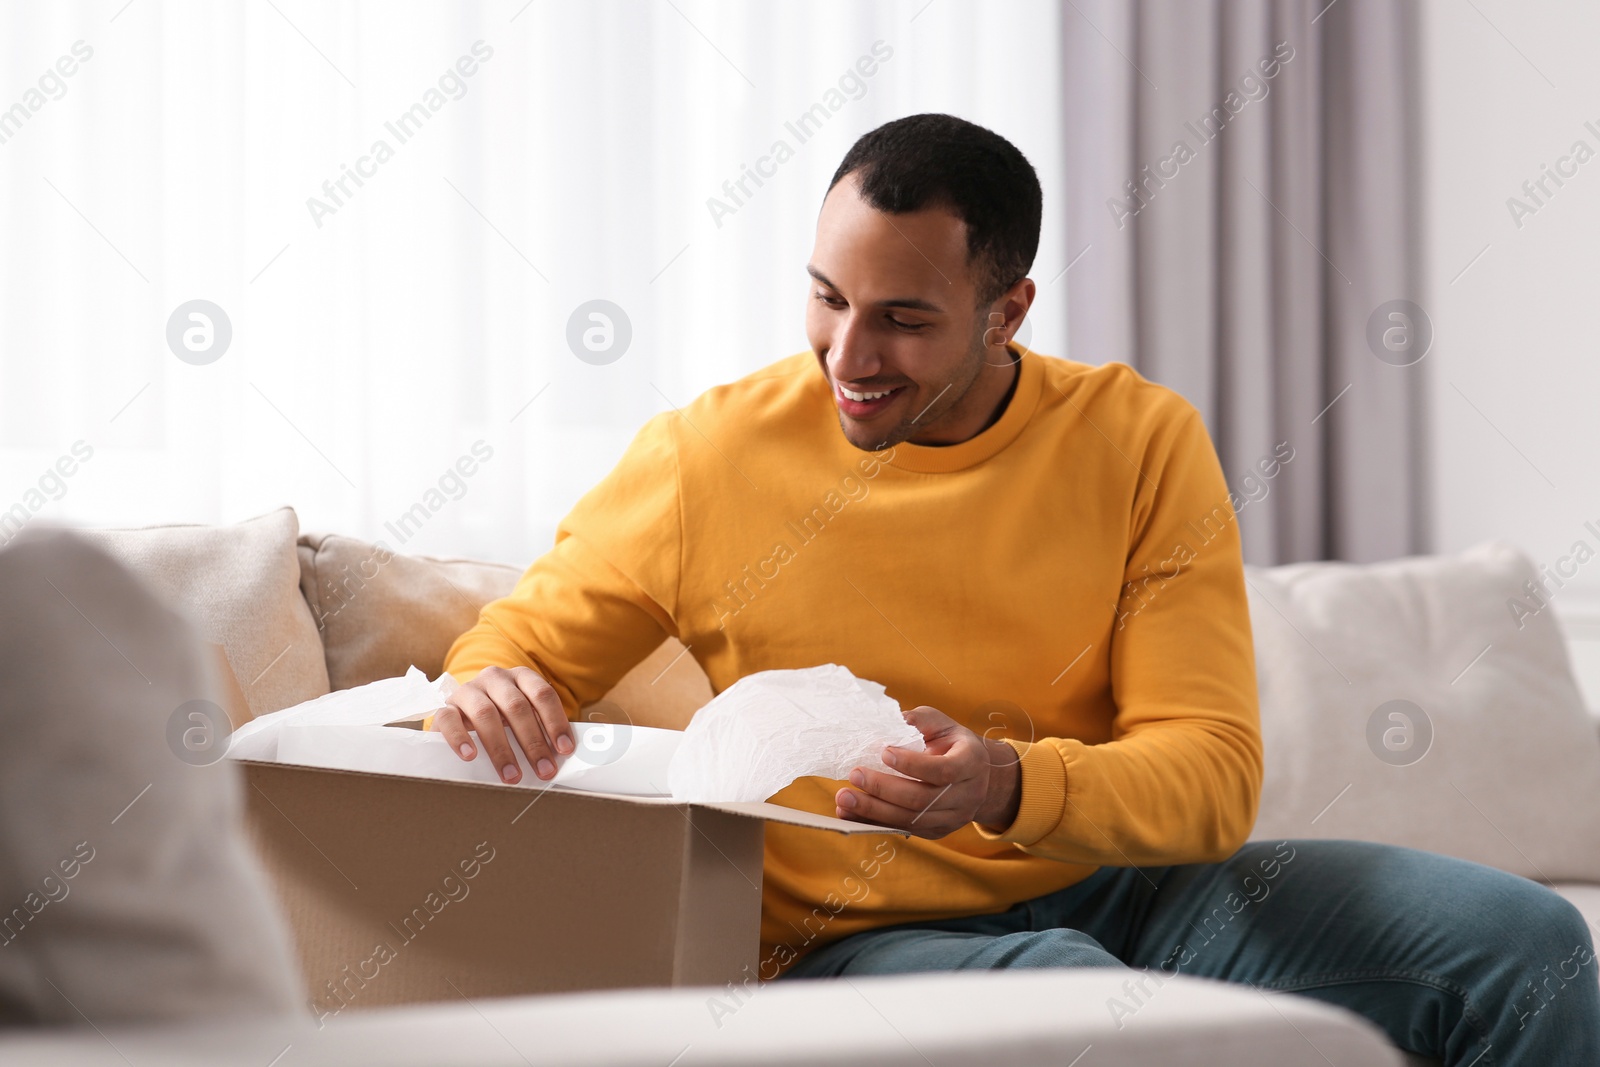 Photo of Happy young man opening parcel at home. Internet shopping